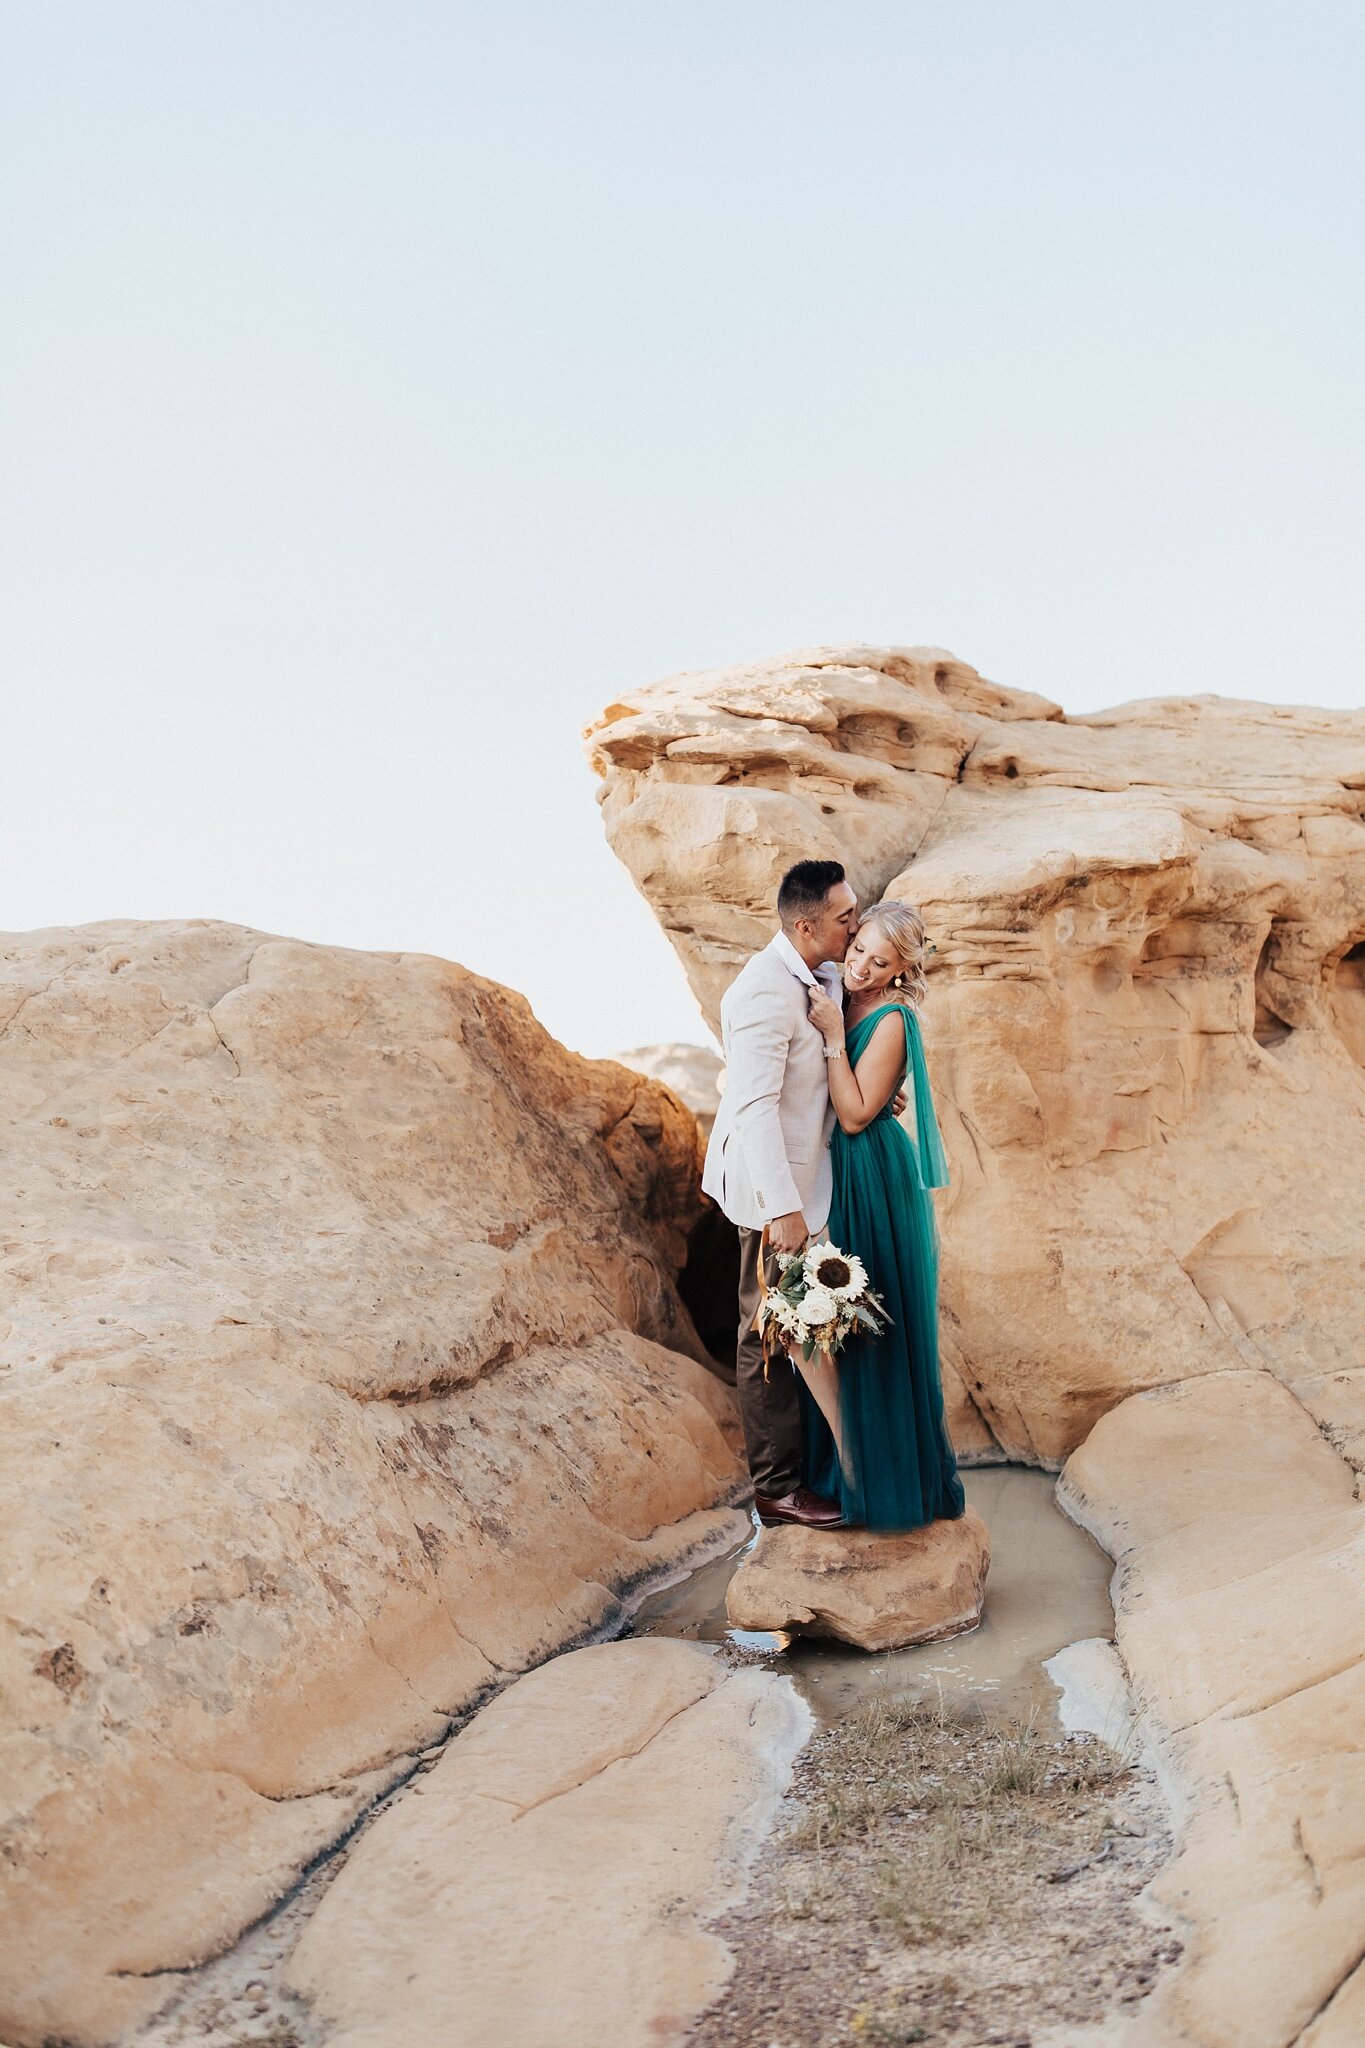 Alicia+lucia+photography+-+albuquerque+wedding+photographer+-+santa+fe+wedding+photography+-+new+mexico+wedding+photographer+-+new+mexico+wedding+-+anniversary+-+styled+anniversary+-+elopement+-+styled+elopement_0012.jpg